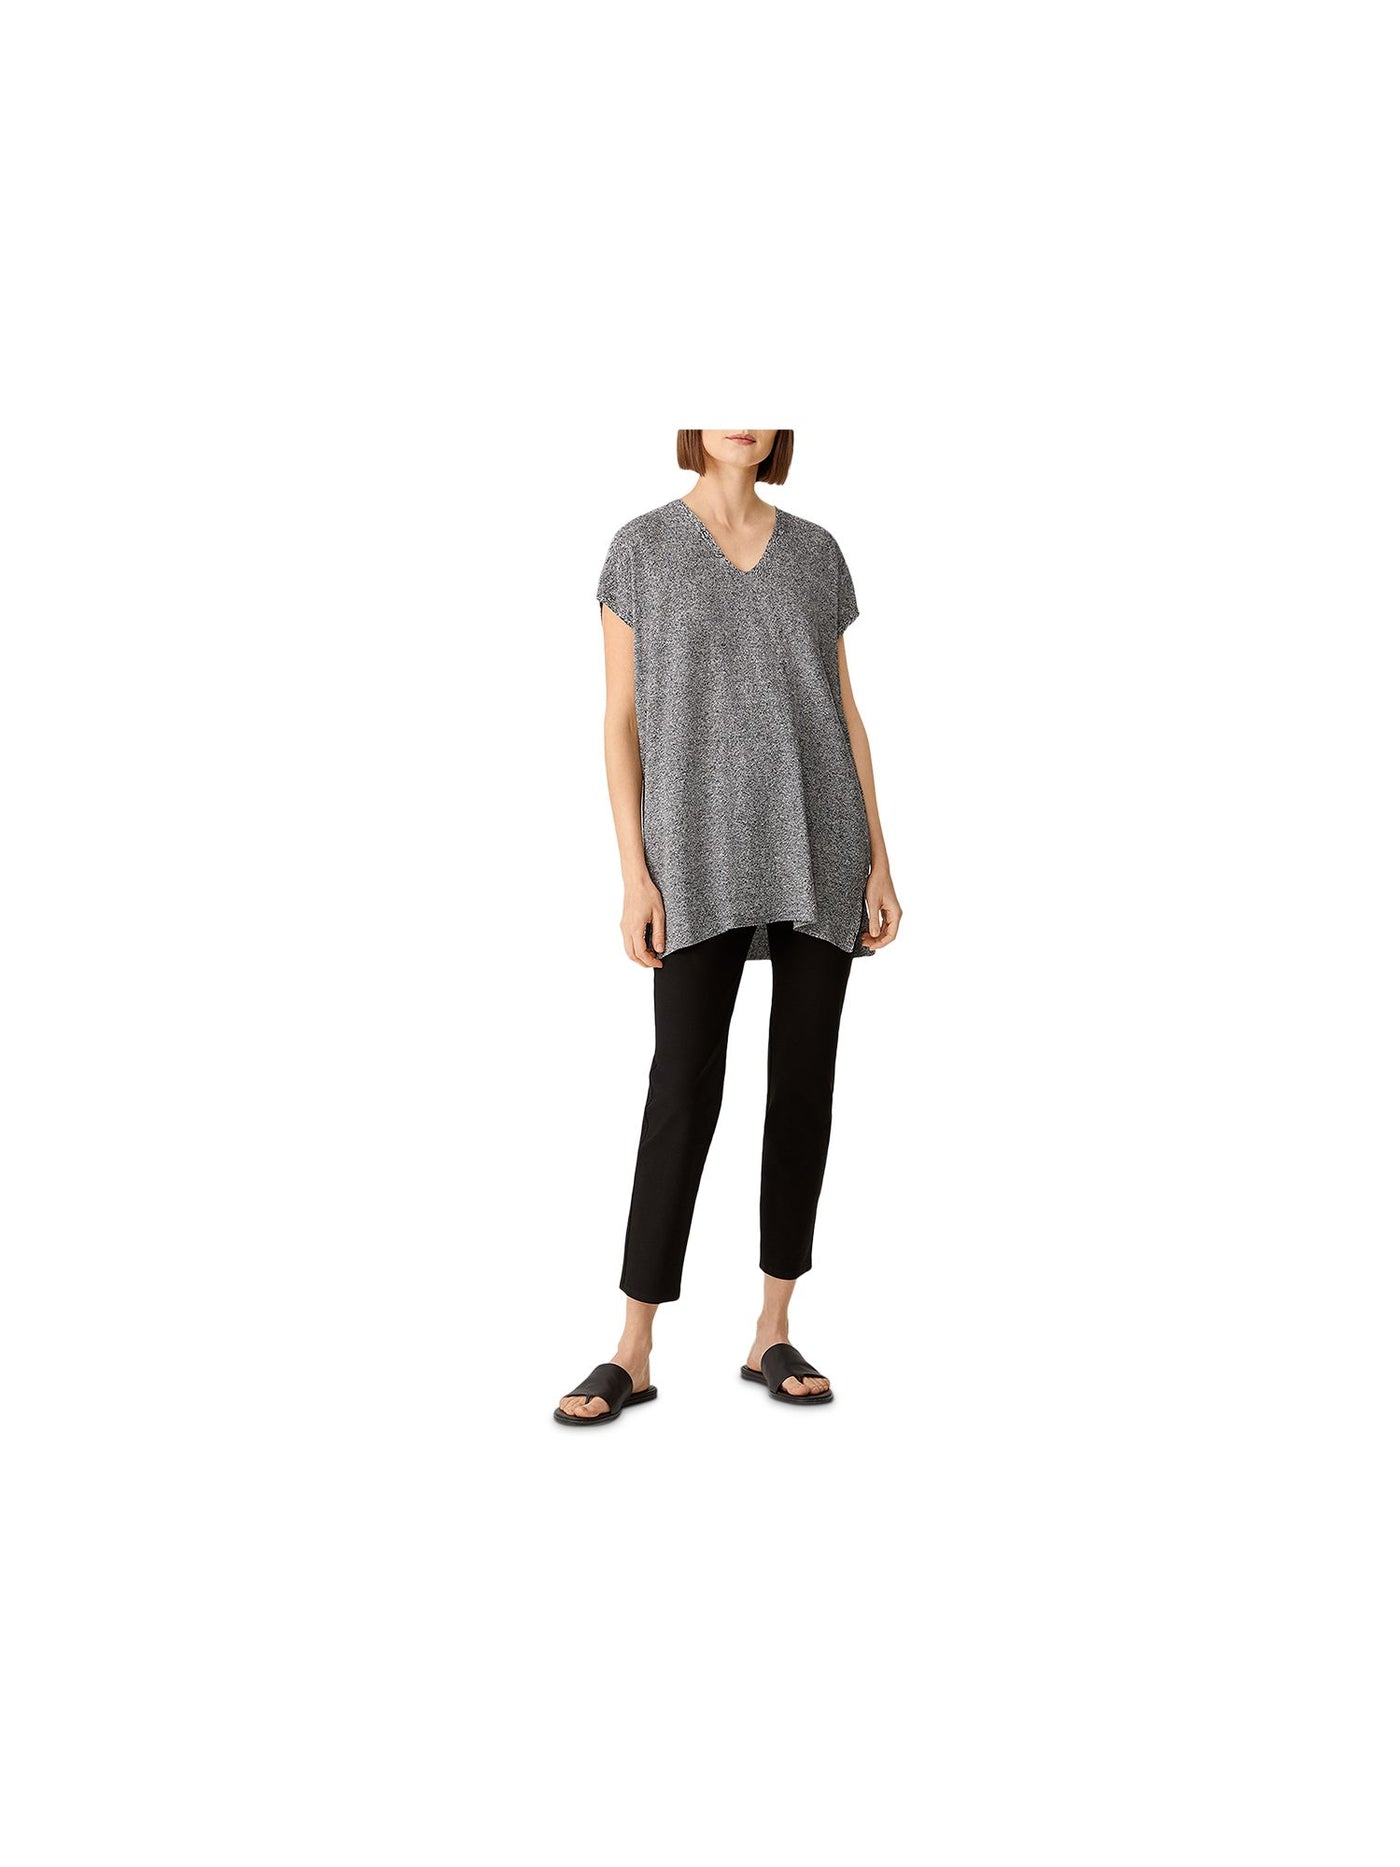 EILEEN FISHER Womens Gray Textured Slitted Drape Style Heather Cap Sleeve V Neck Tunic Top Petites PM